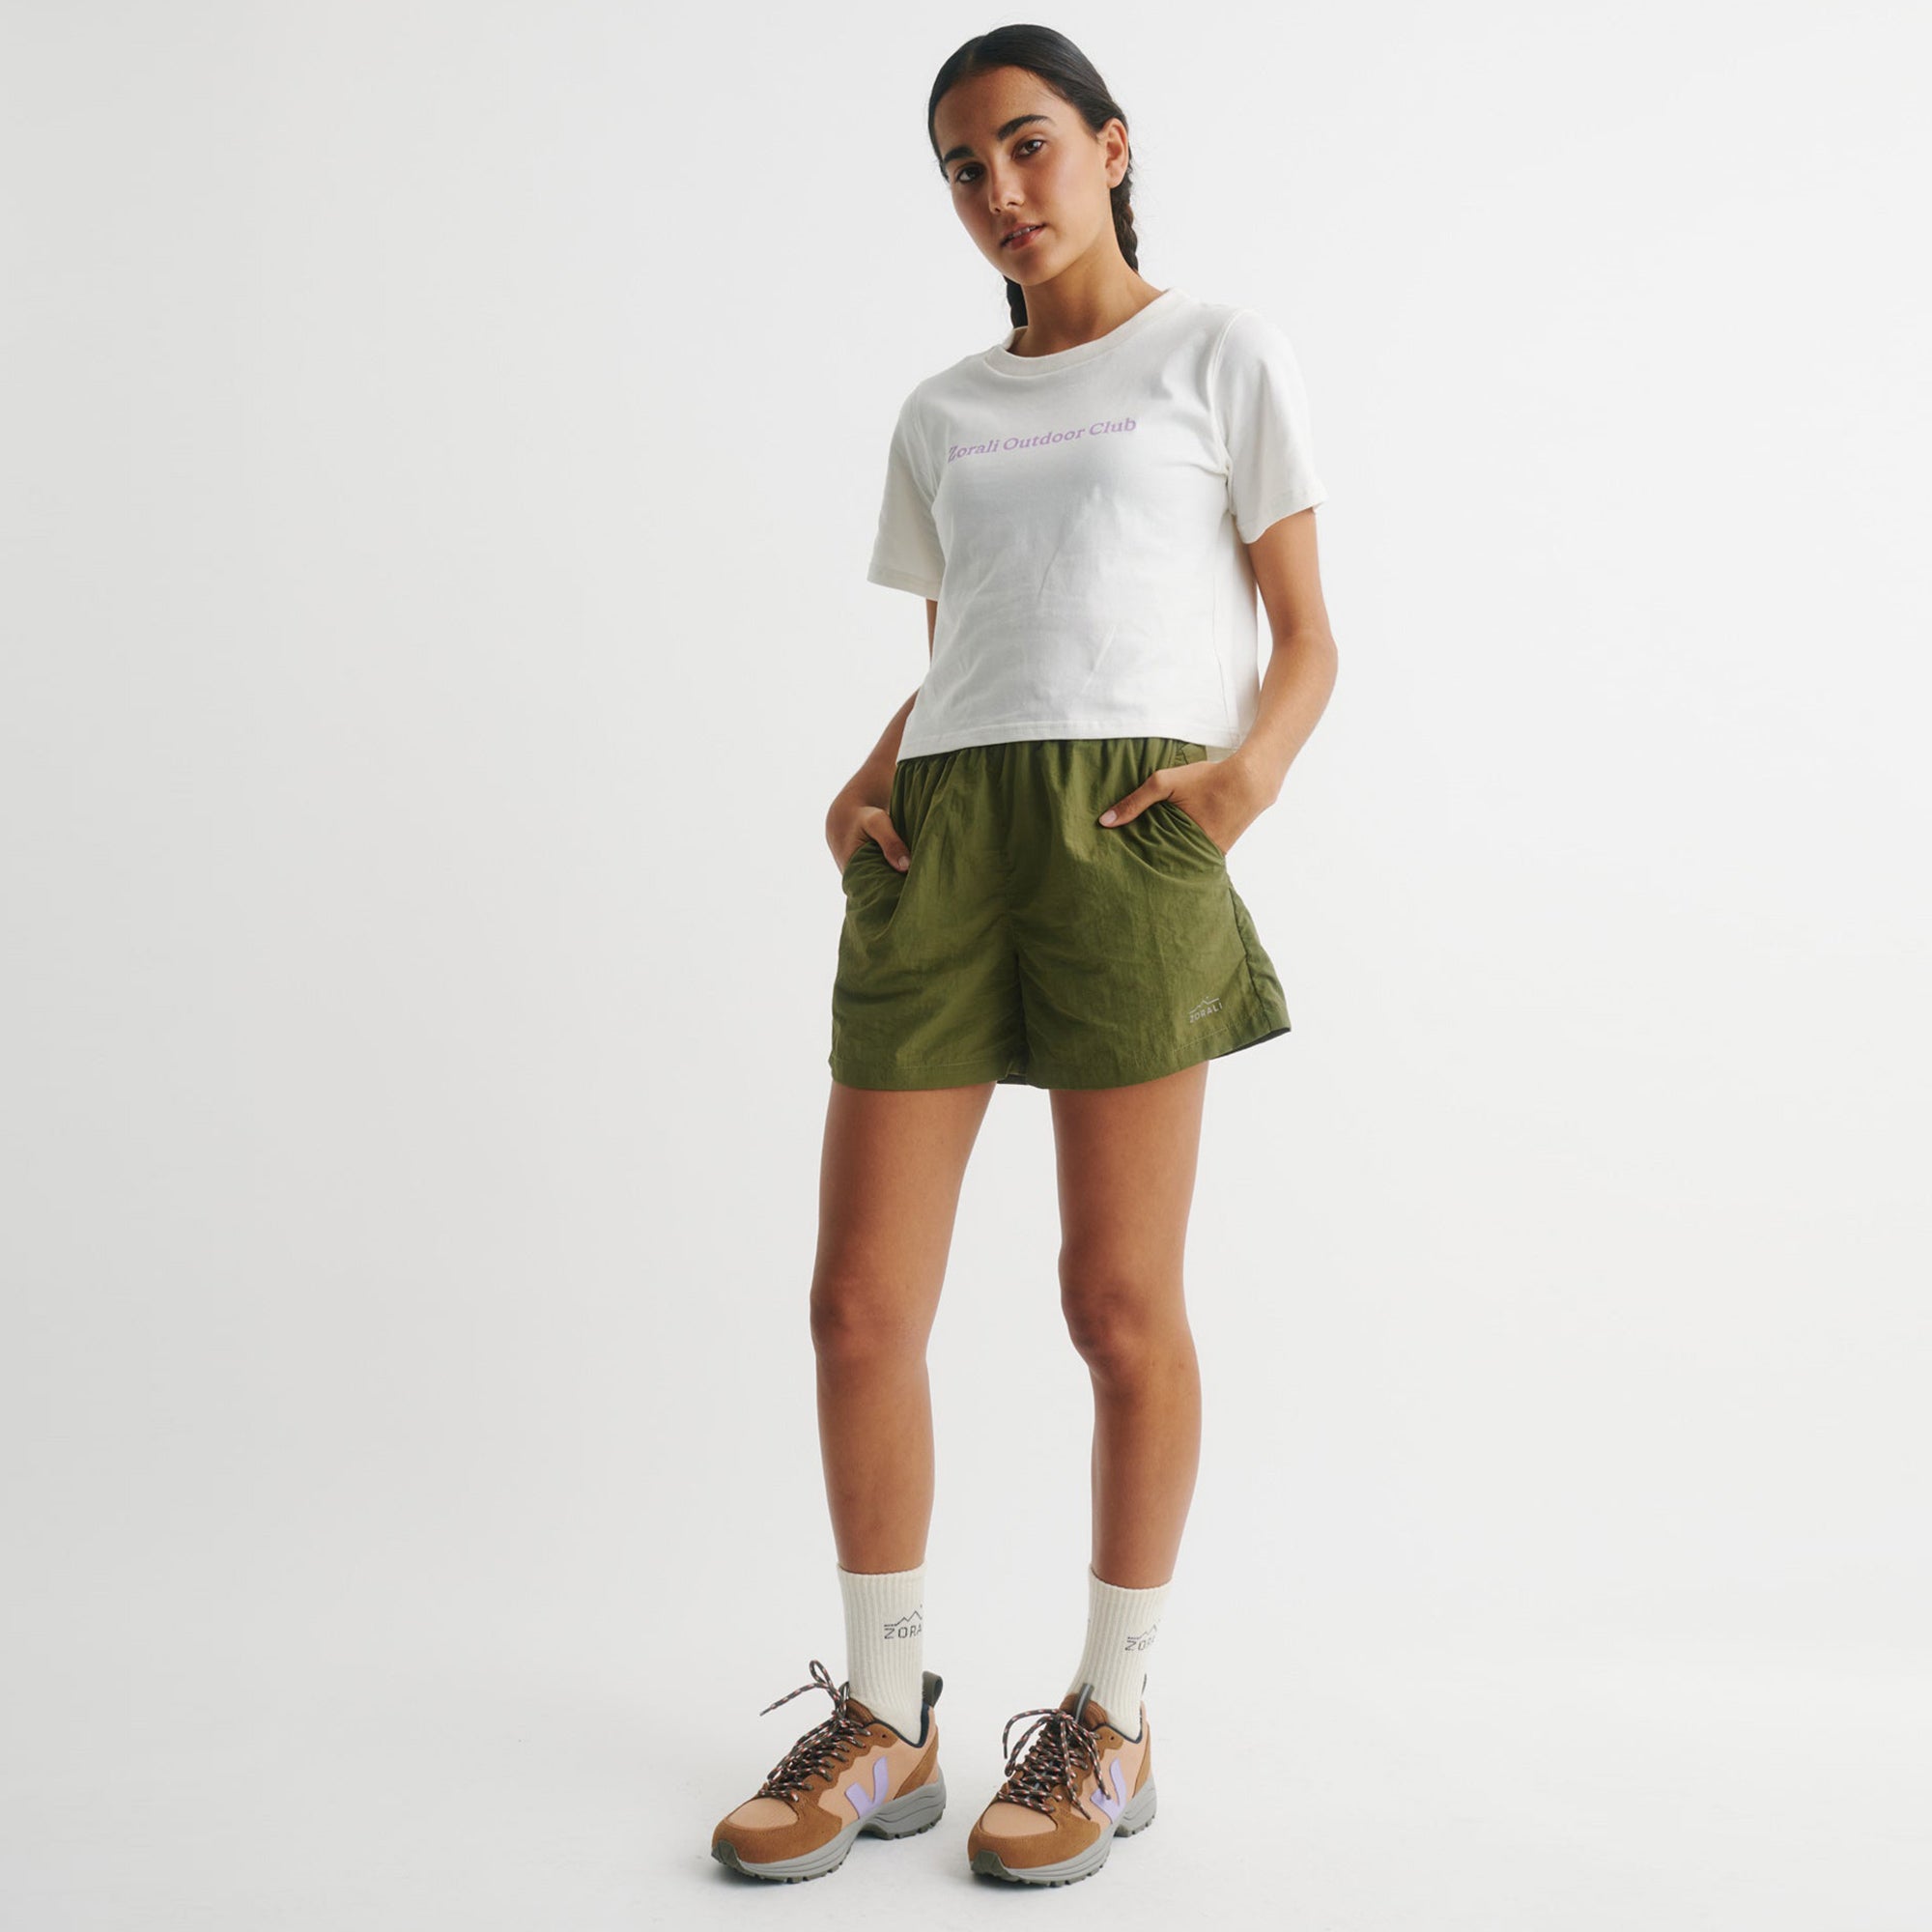 Outdoor Club Cropped Tee White